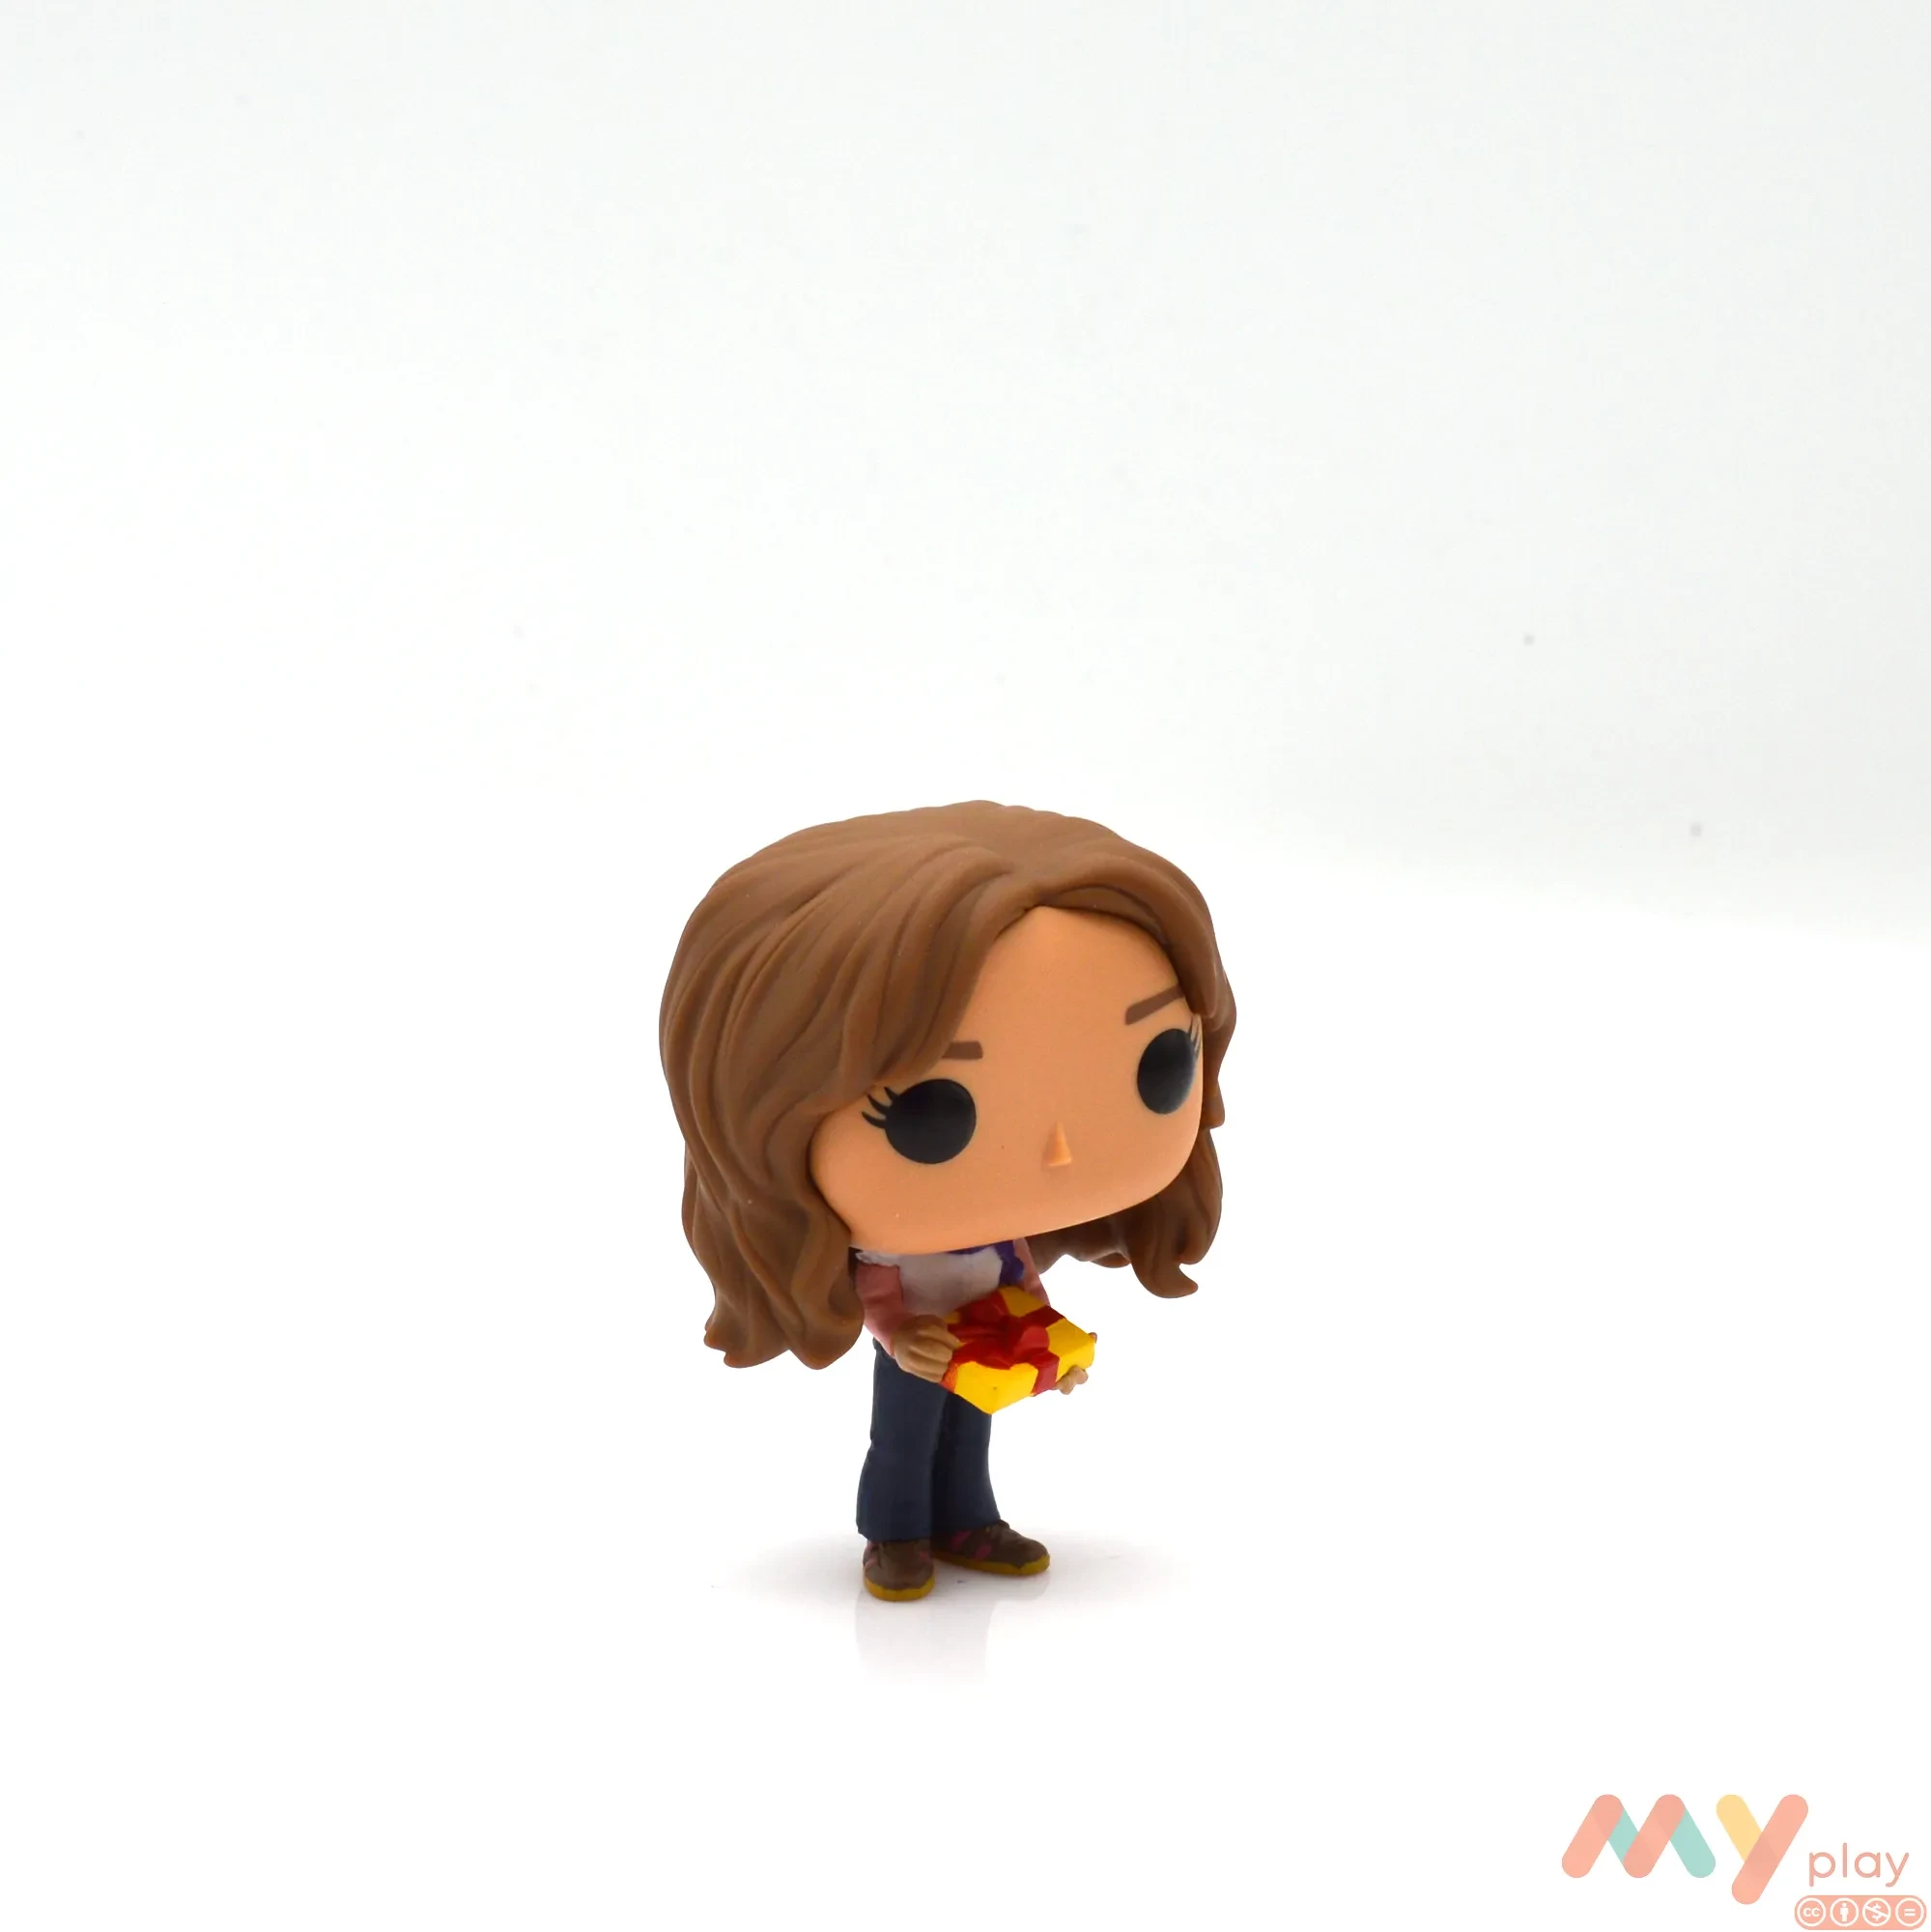 Funko Pop! Movies: Harry Potter Holiday - Hermione Granger, Multicolor  (51153)